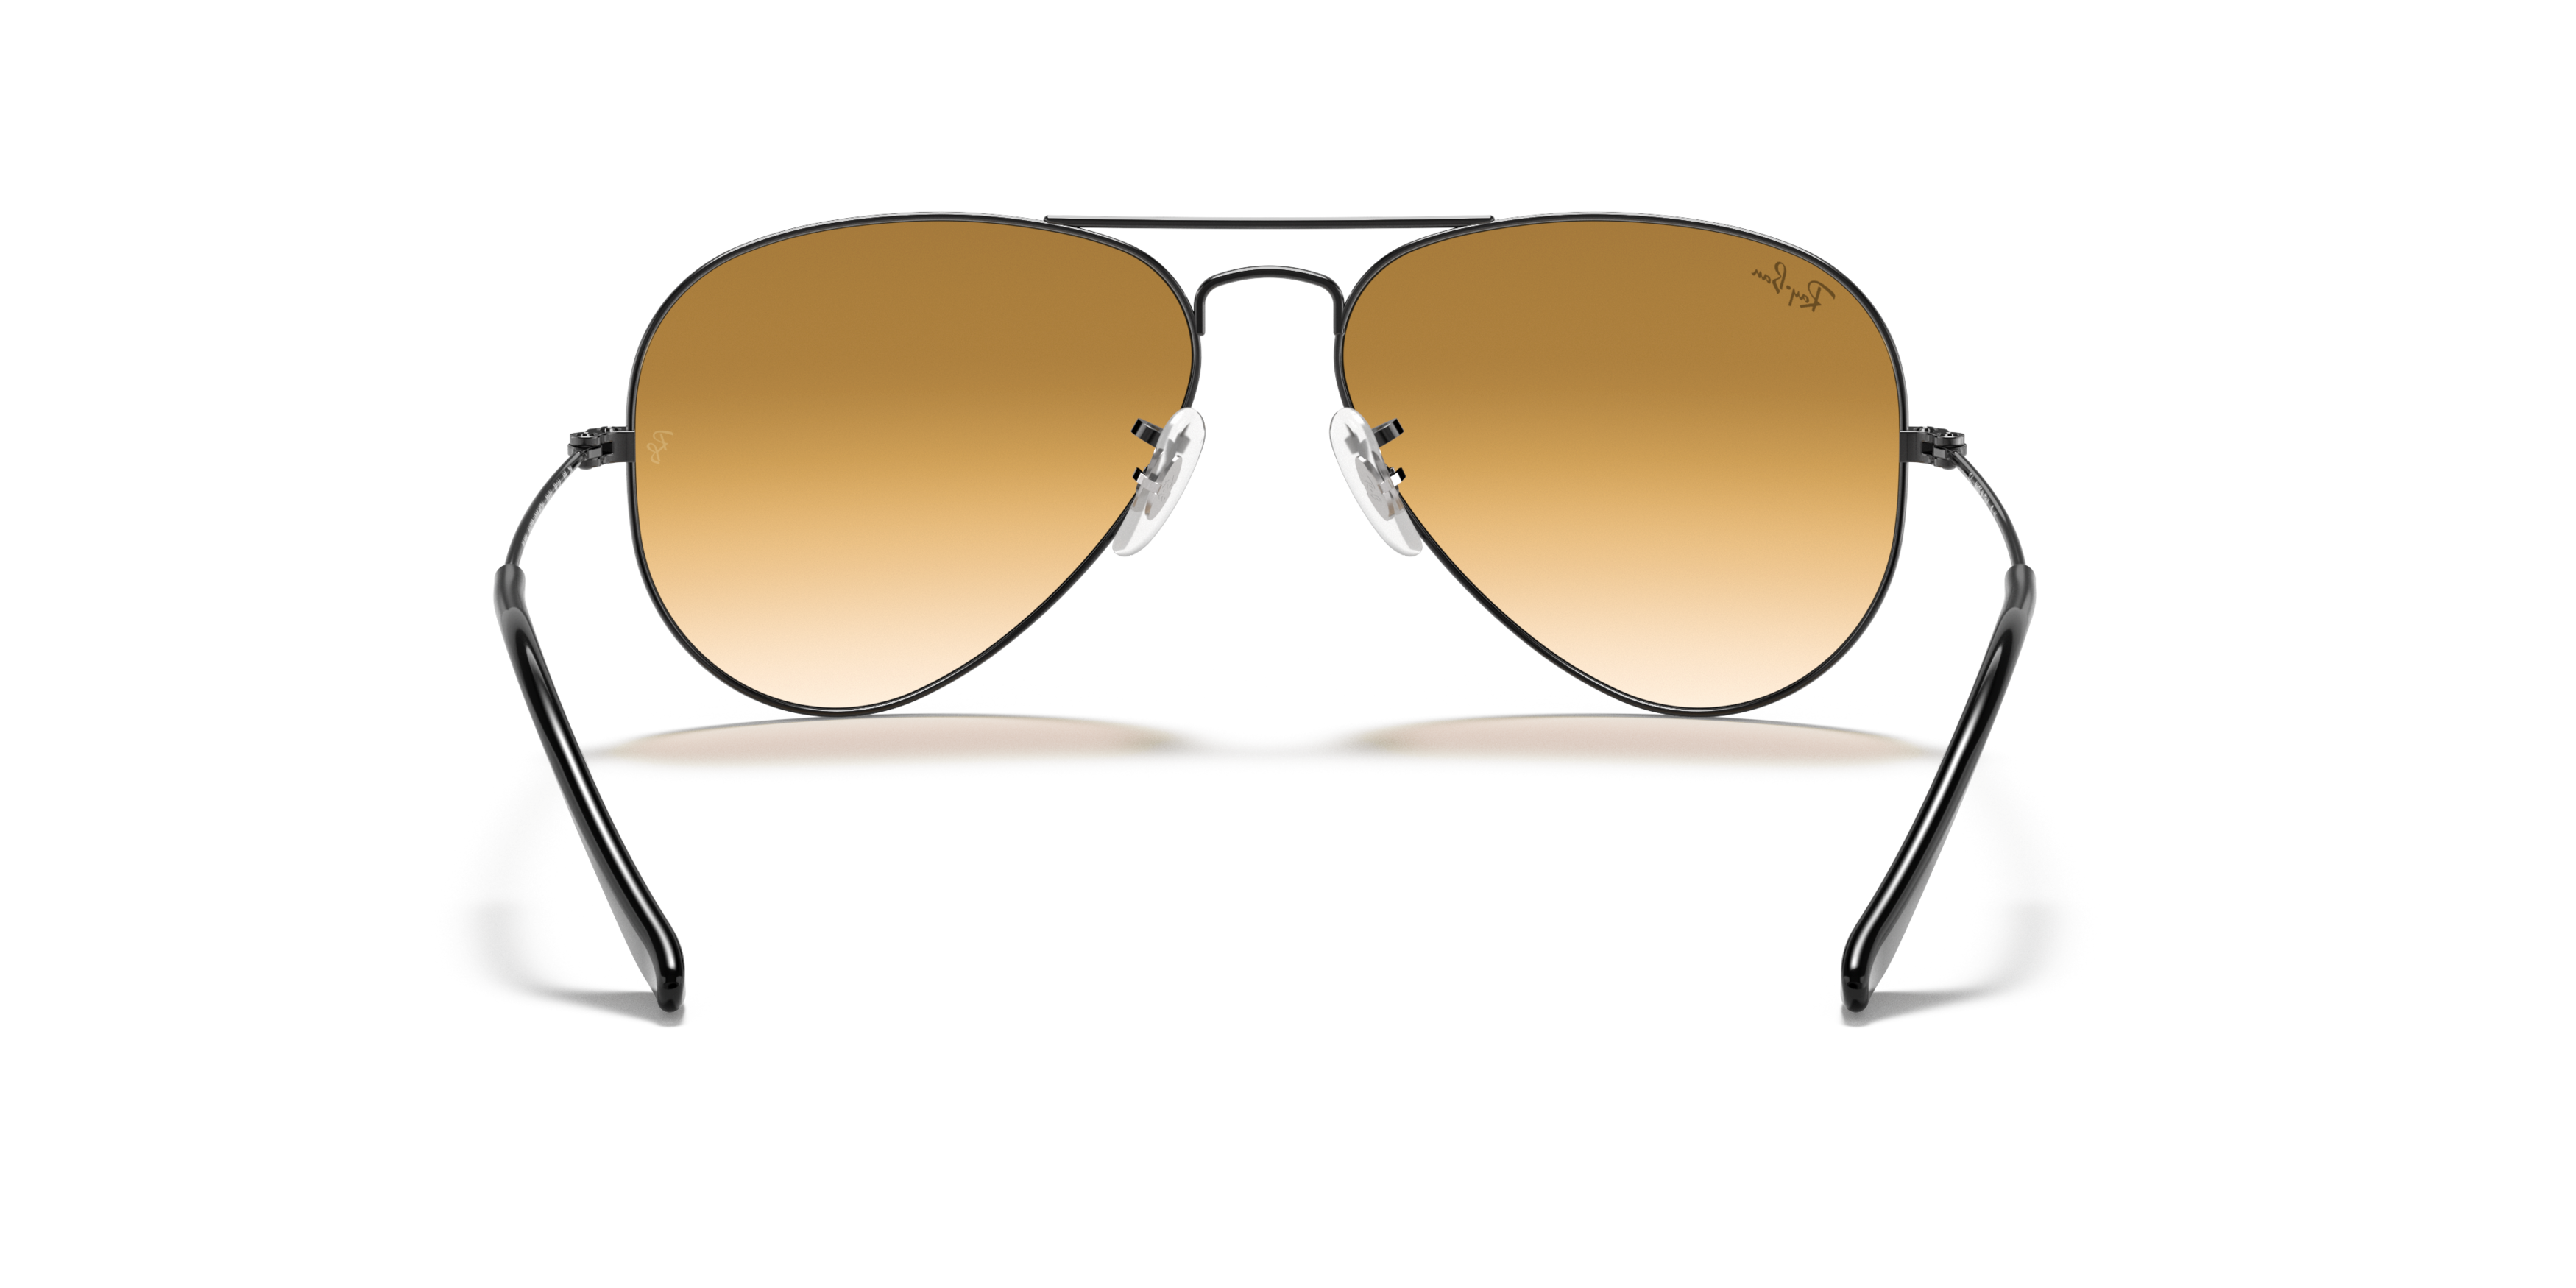 [products.image.detail02] Ray-Ban Aviator Gradient RB3025 004/51